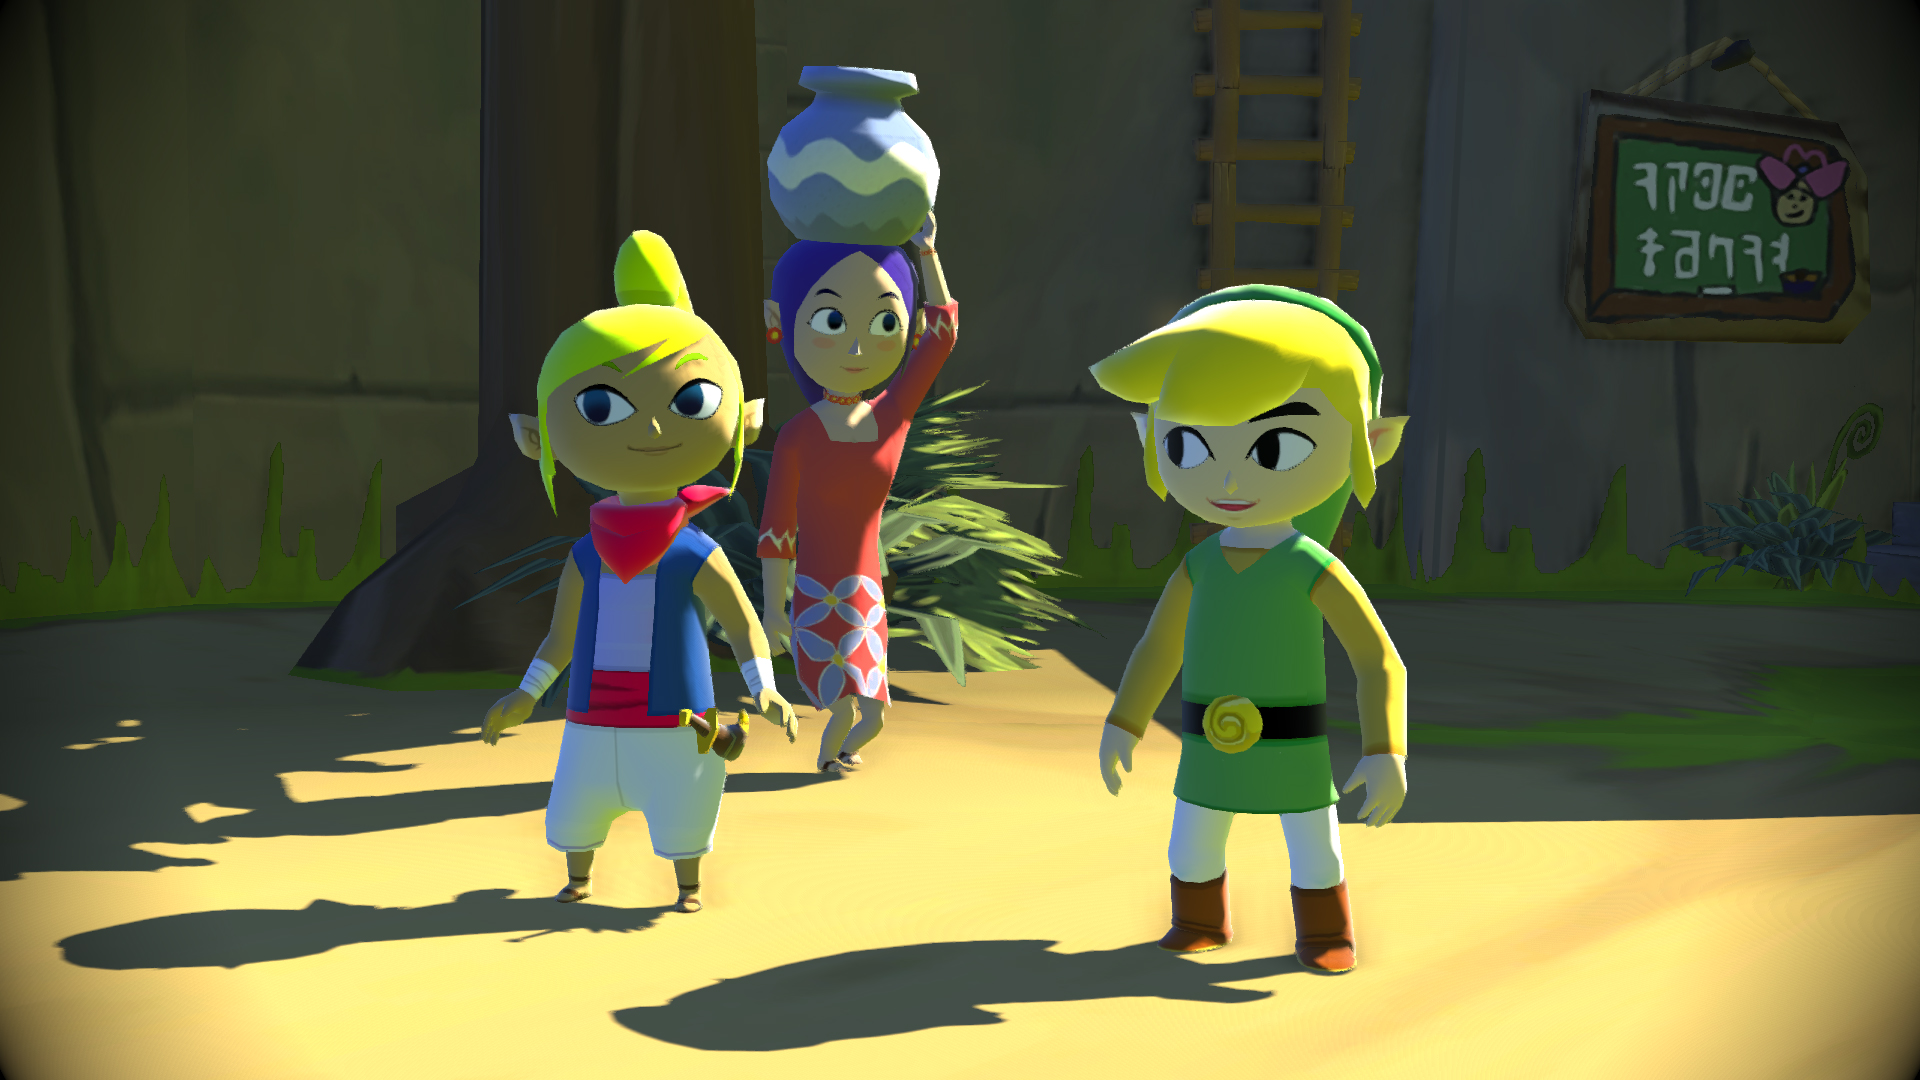 New story mode scenario for The Wind Waker content included in  #HyruleWarriorsLegends on #3DS!